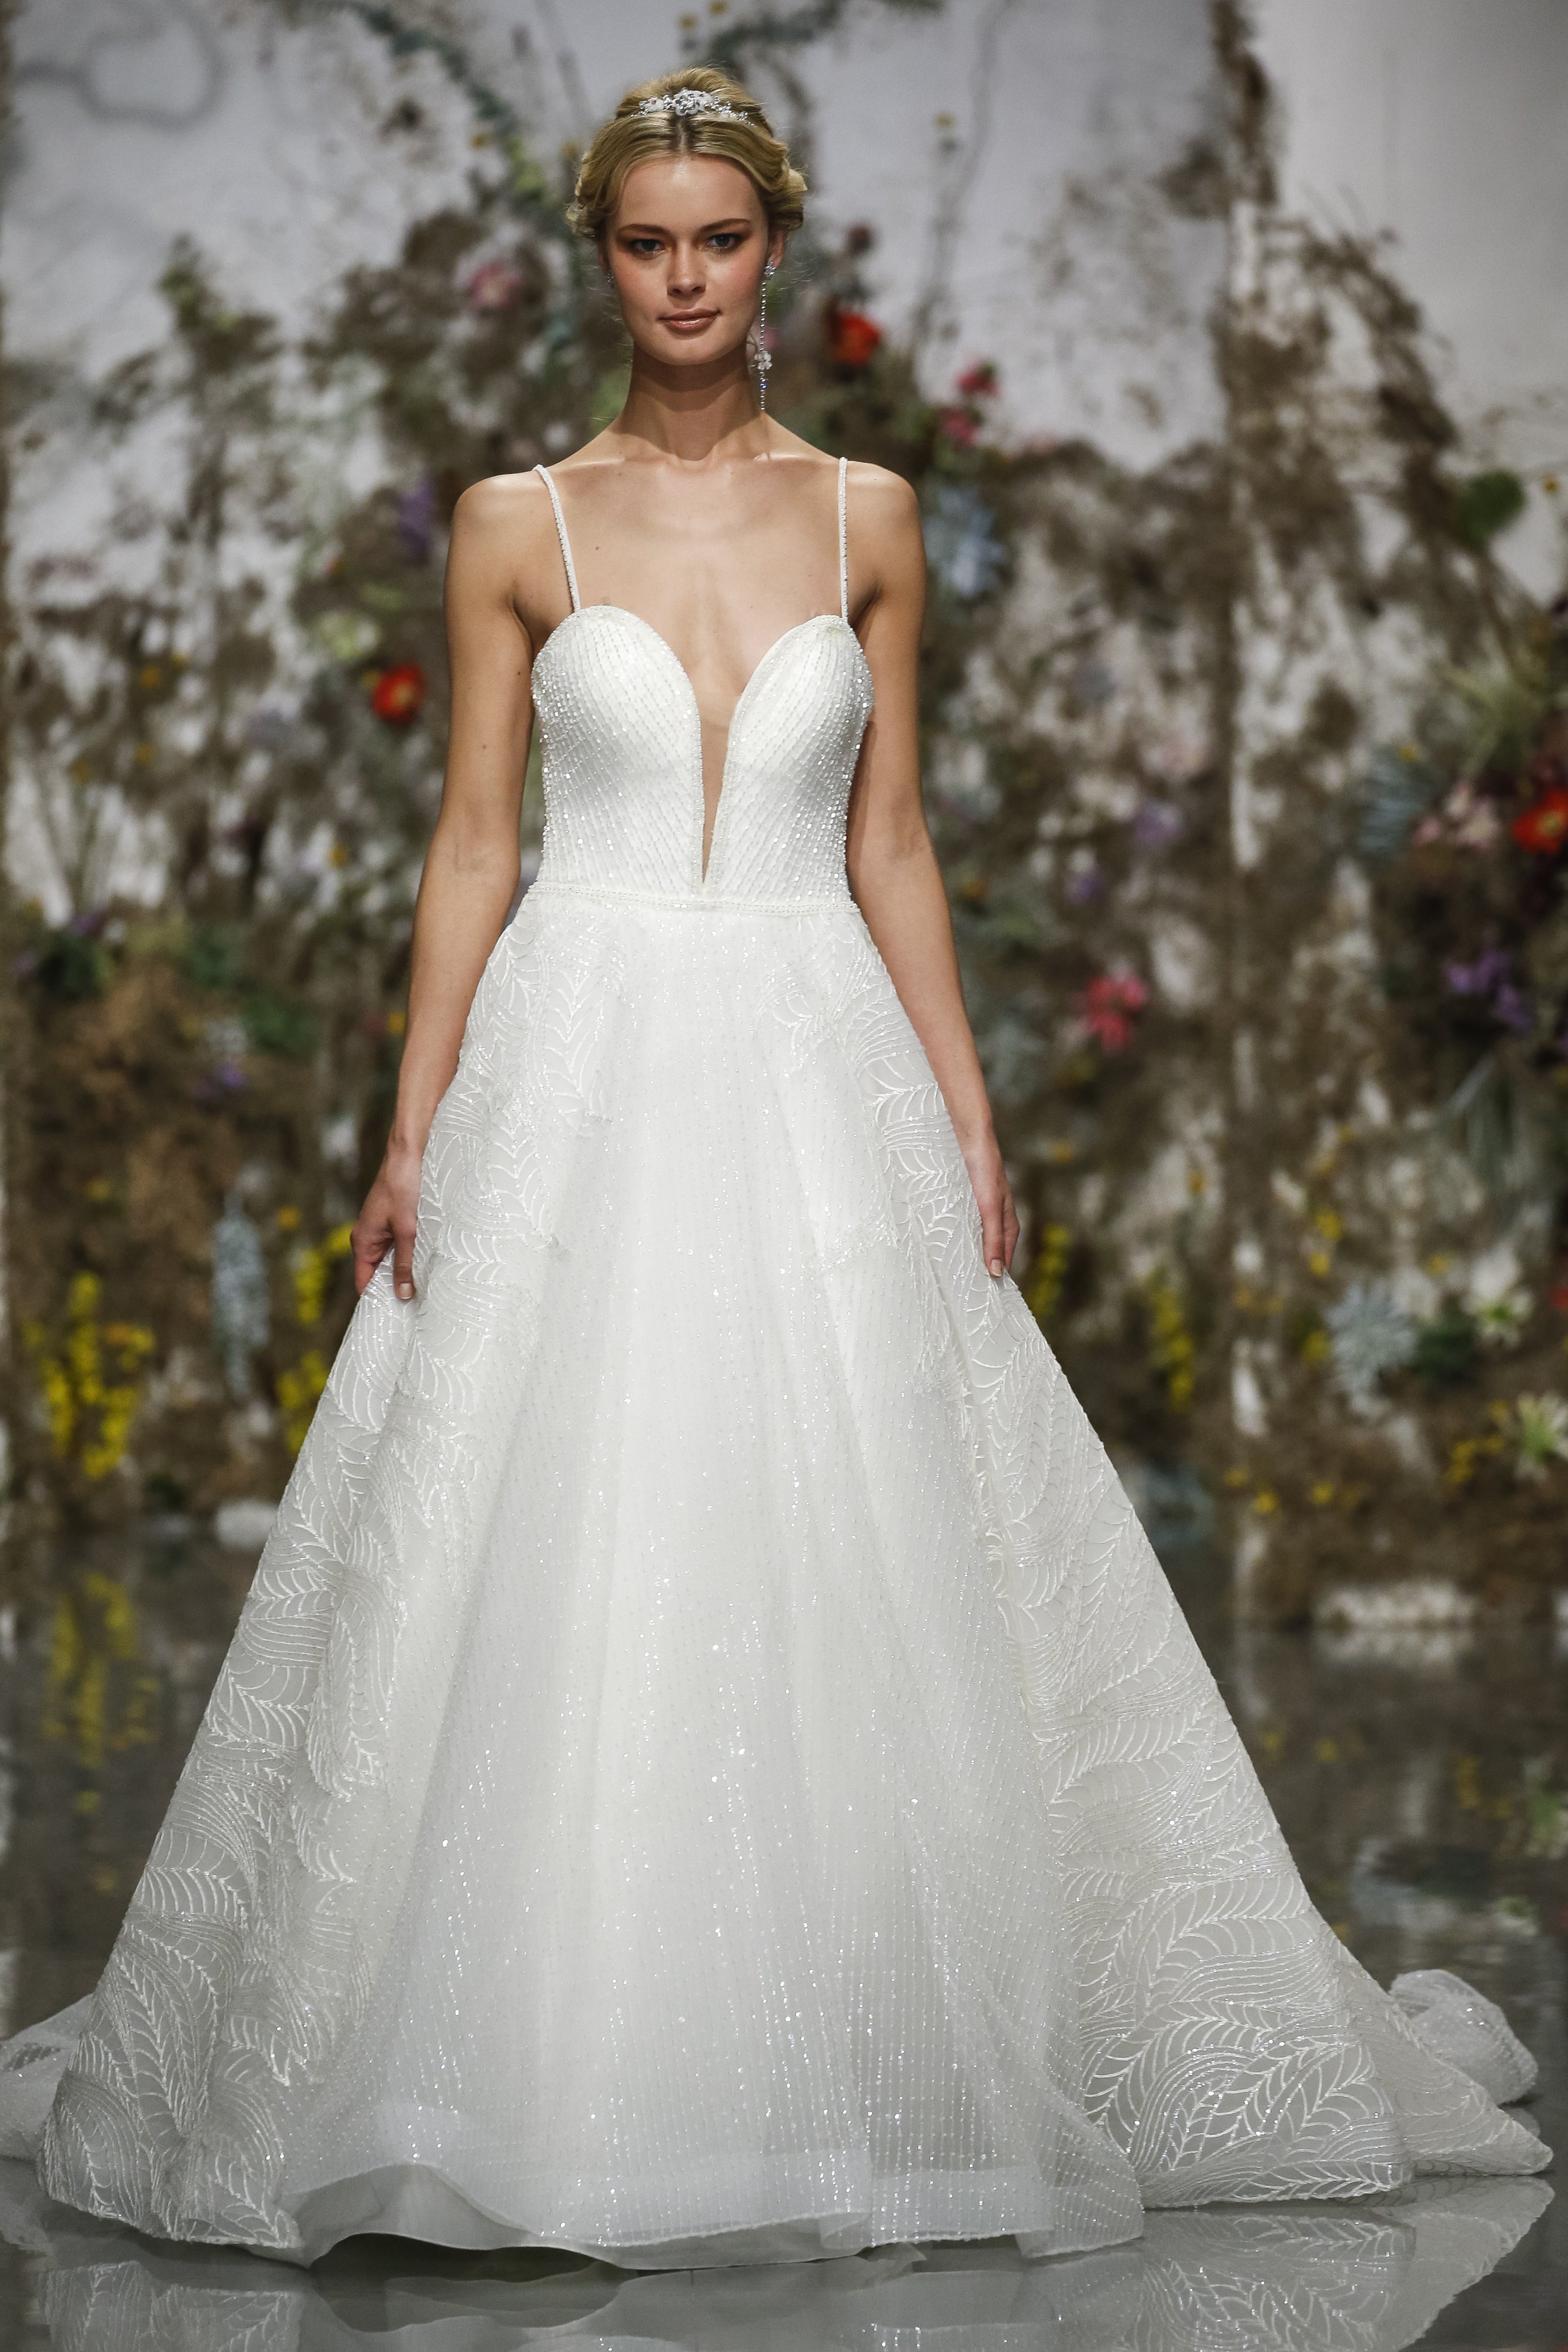 23021 Deep V Neckline Wedding Dress with Mickdo Fabric ALine Skirt Bridal  Gown Dress with Directly Supplied by Manufacturer Bridal  China Wedding  Dress and Bridal Wedding Dress price  MadeinChinacom